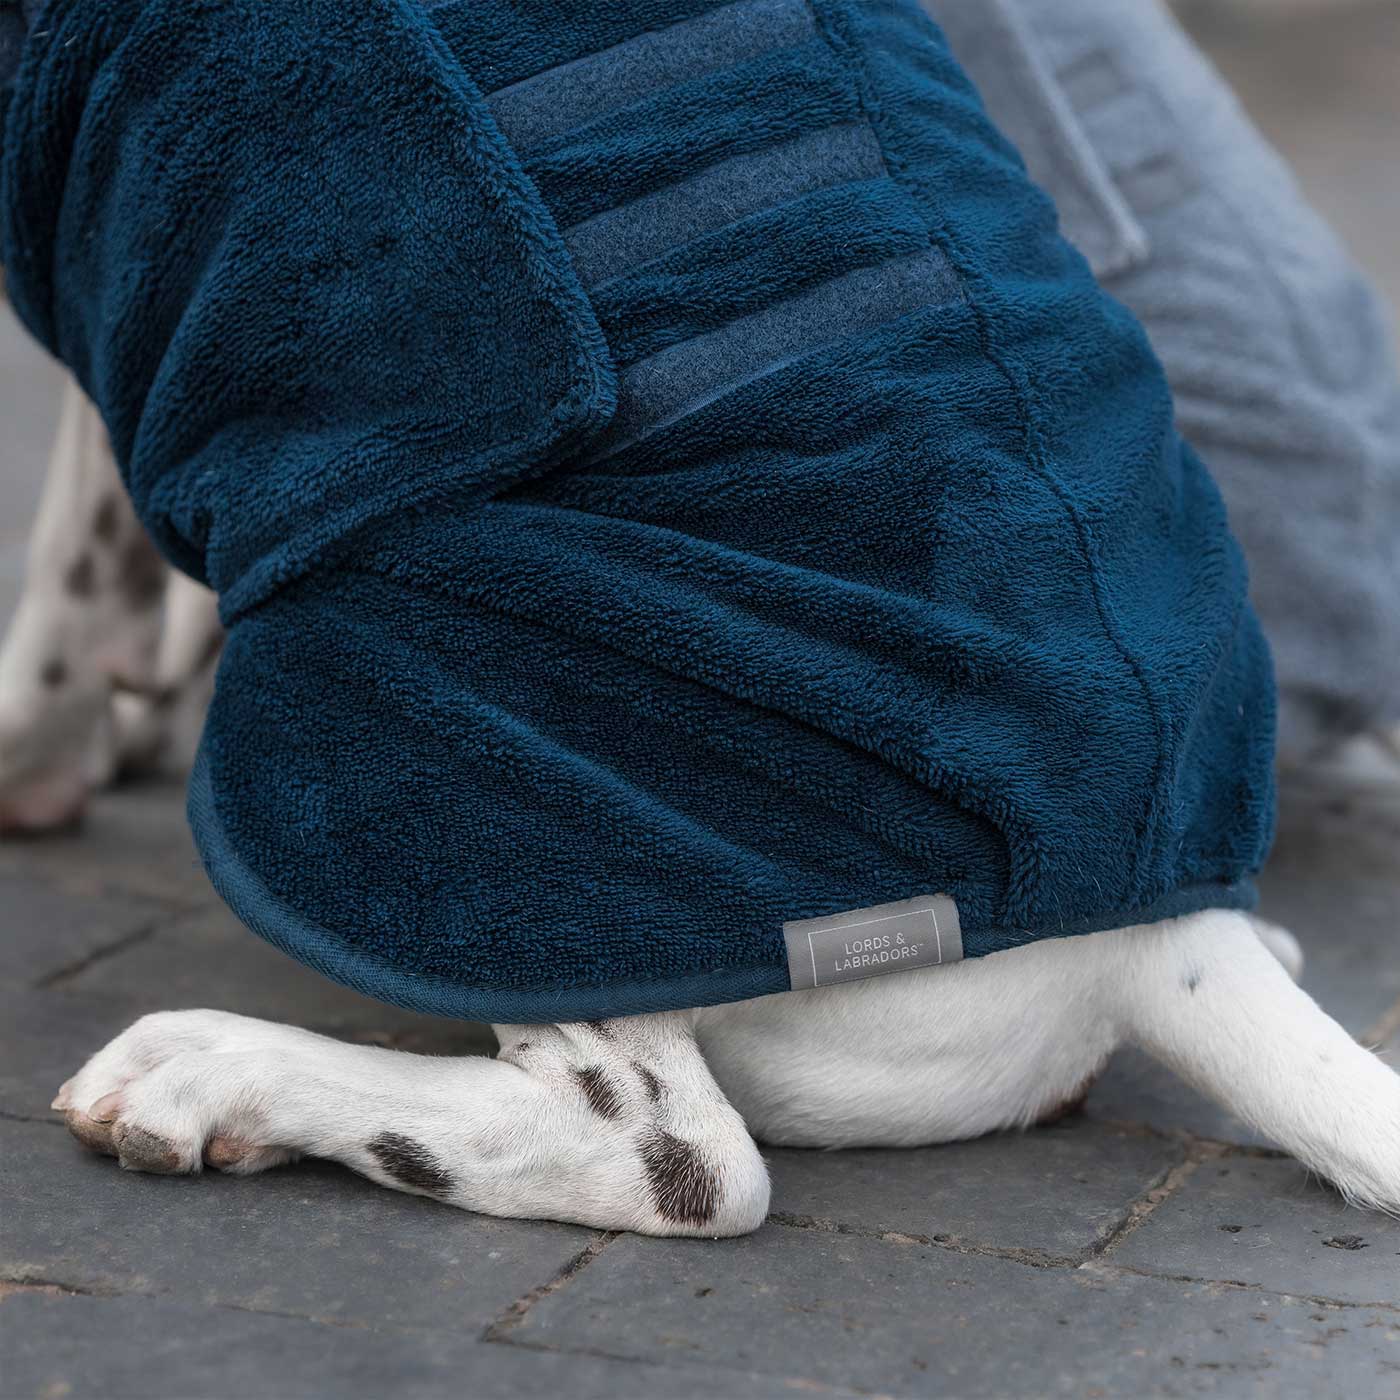 Discover the perfect dog drying with our bamboo dog drying coat in Navy The ideal choice for pet drying after walking and bath-time. Made using luxurious bamboo to aid sensitive skin! Available to personalize now at Lords & Labradors US, in 5 sizes and 4 beautiful colors